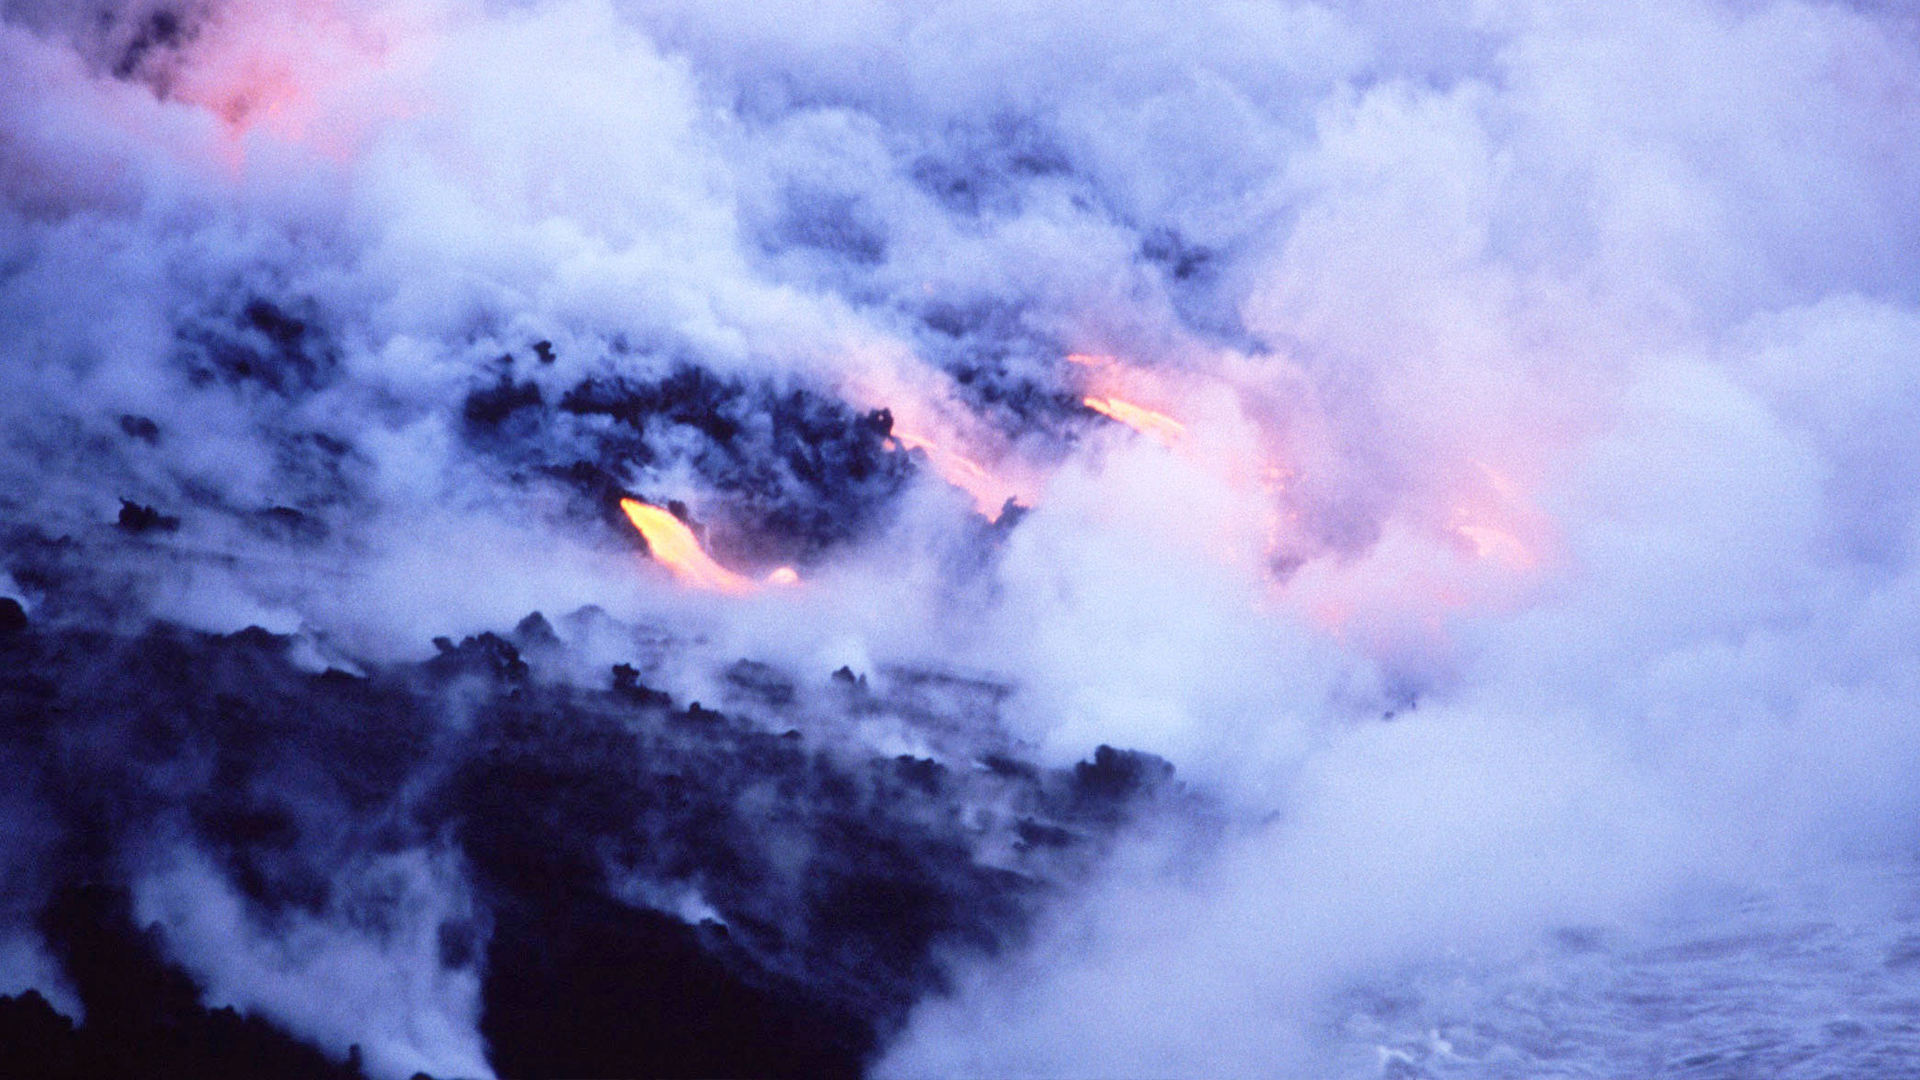 Close up of an erupting volcano with molten lava and smoke